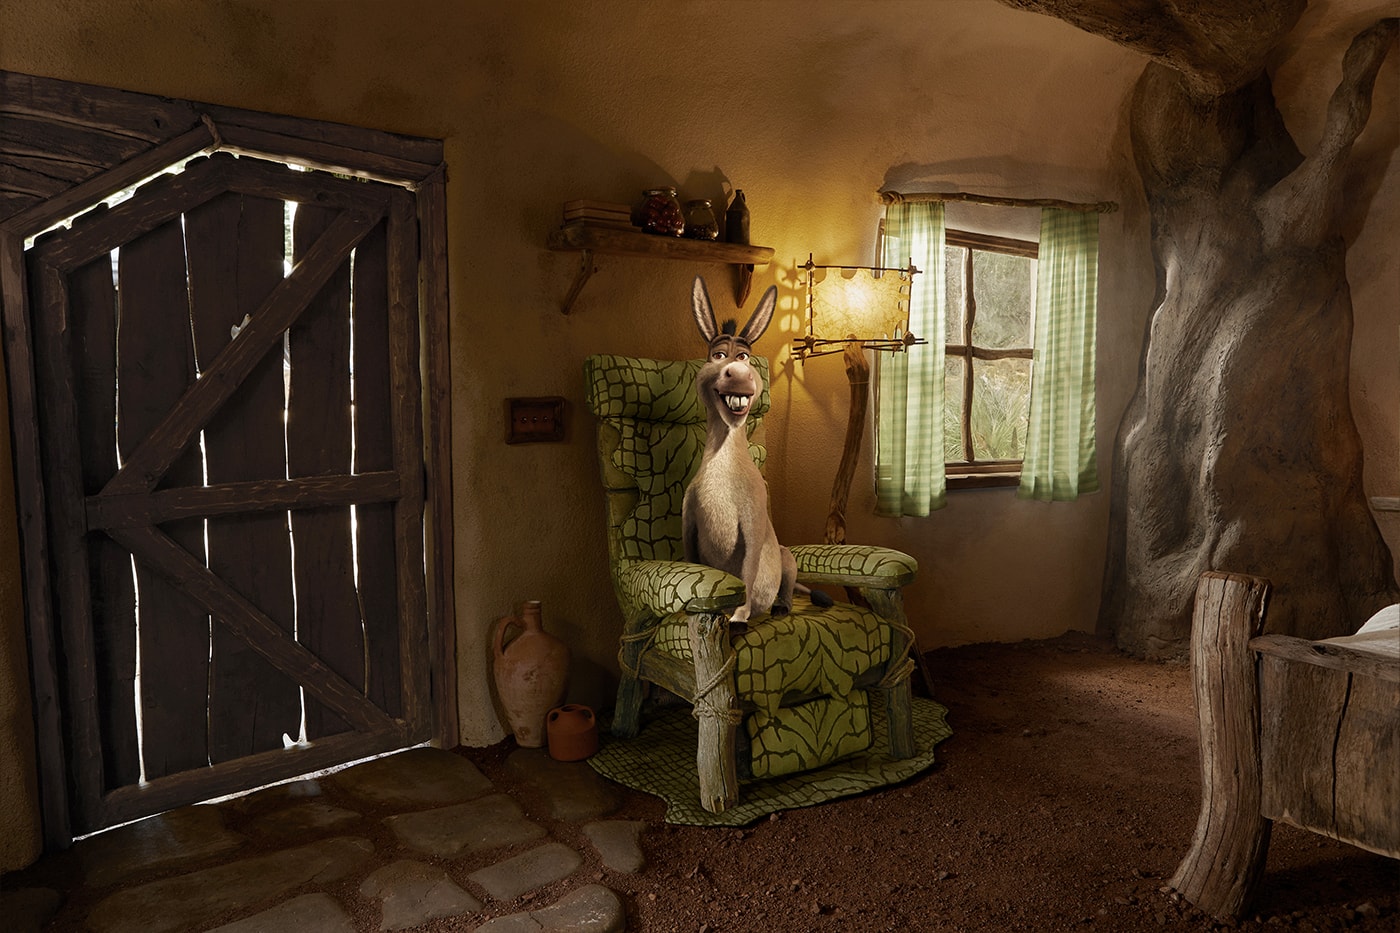 Shrek's 'swamp' now available to rent on Airbnb